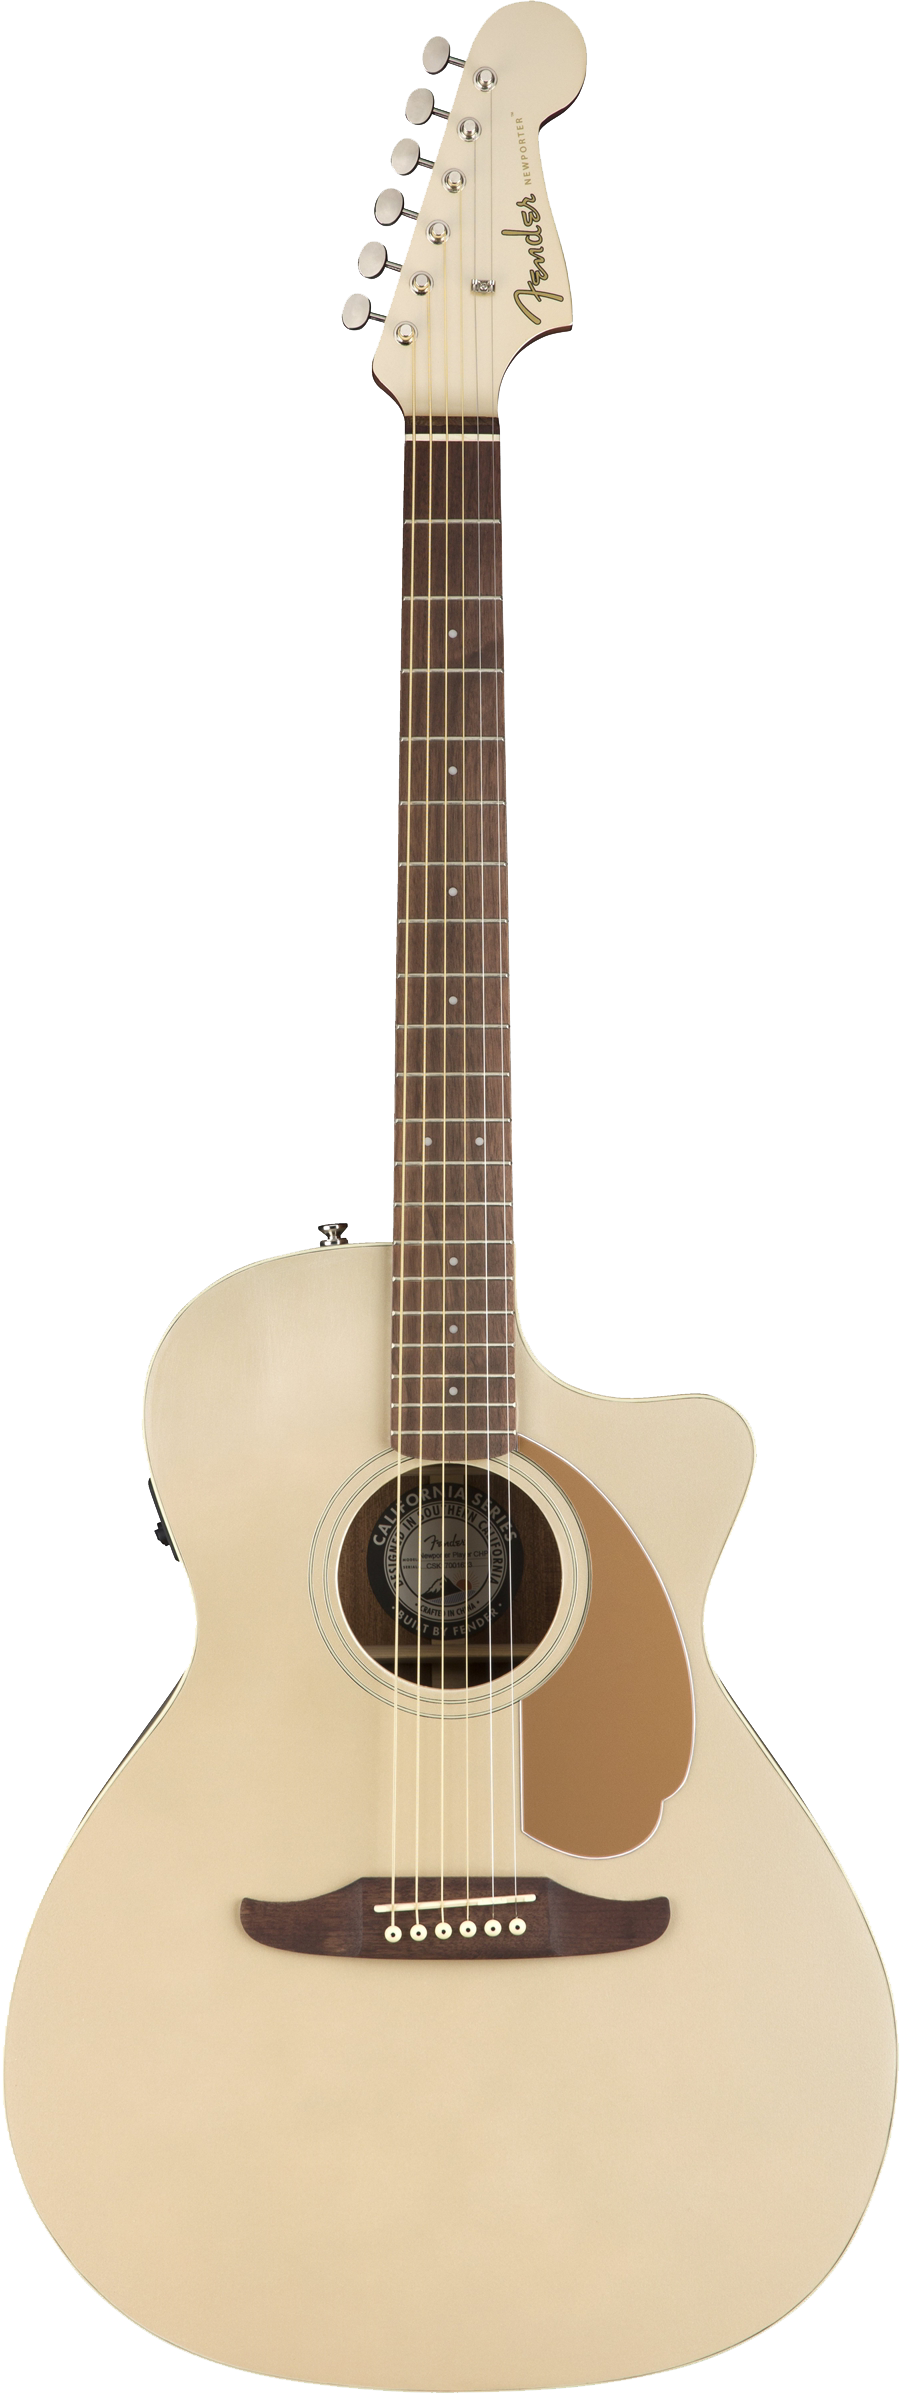 Fender Newporter Player Acoustic / Electric Guitar - Champagne